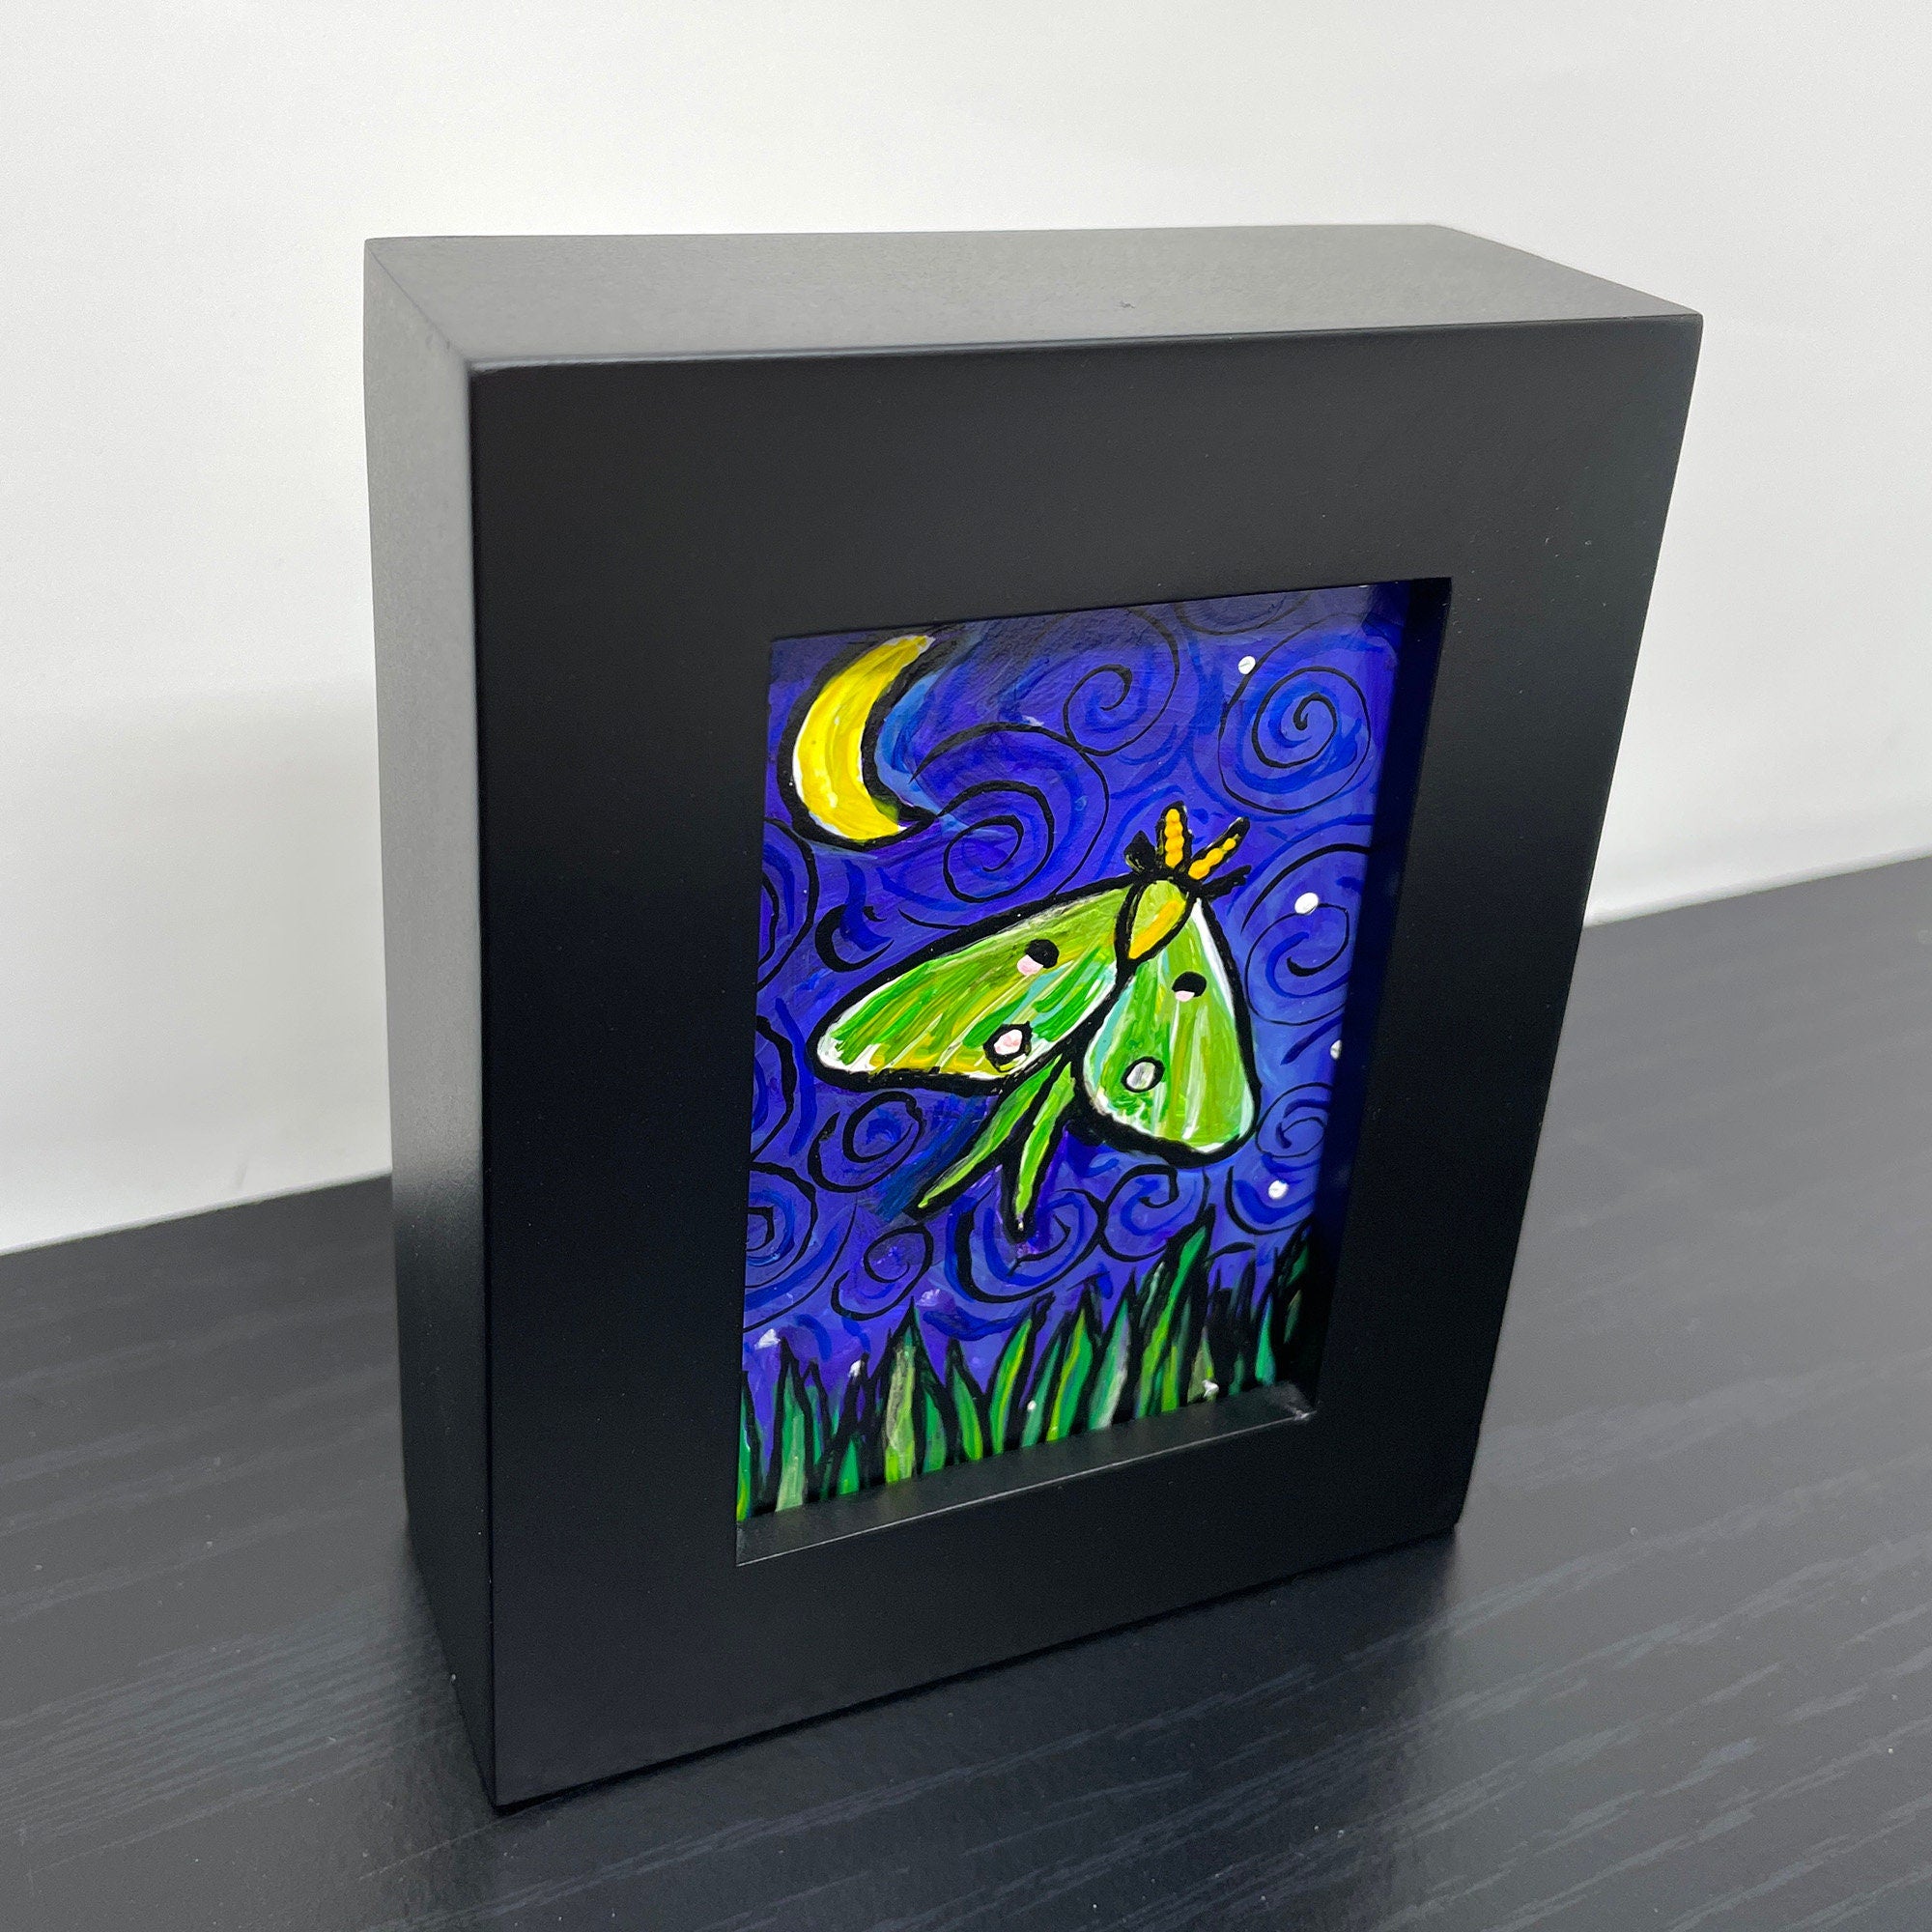 Side view of Luna Moth painting on a shelf. Luna Moth painting in black wood frame features green and yellow luna moth on night sky with crescent yellow moon and white stars. Long grasses dance along the bottom of the scene.